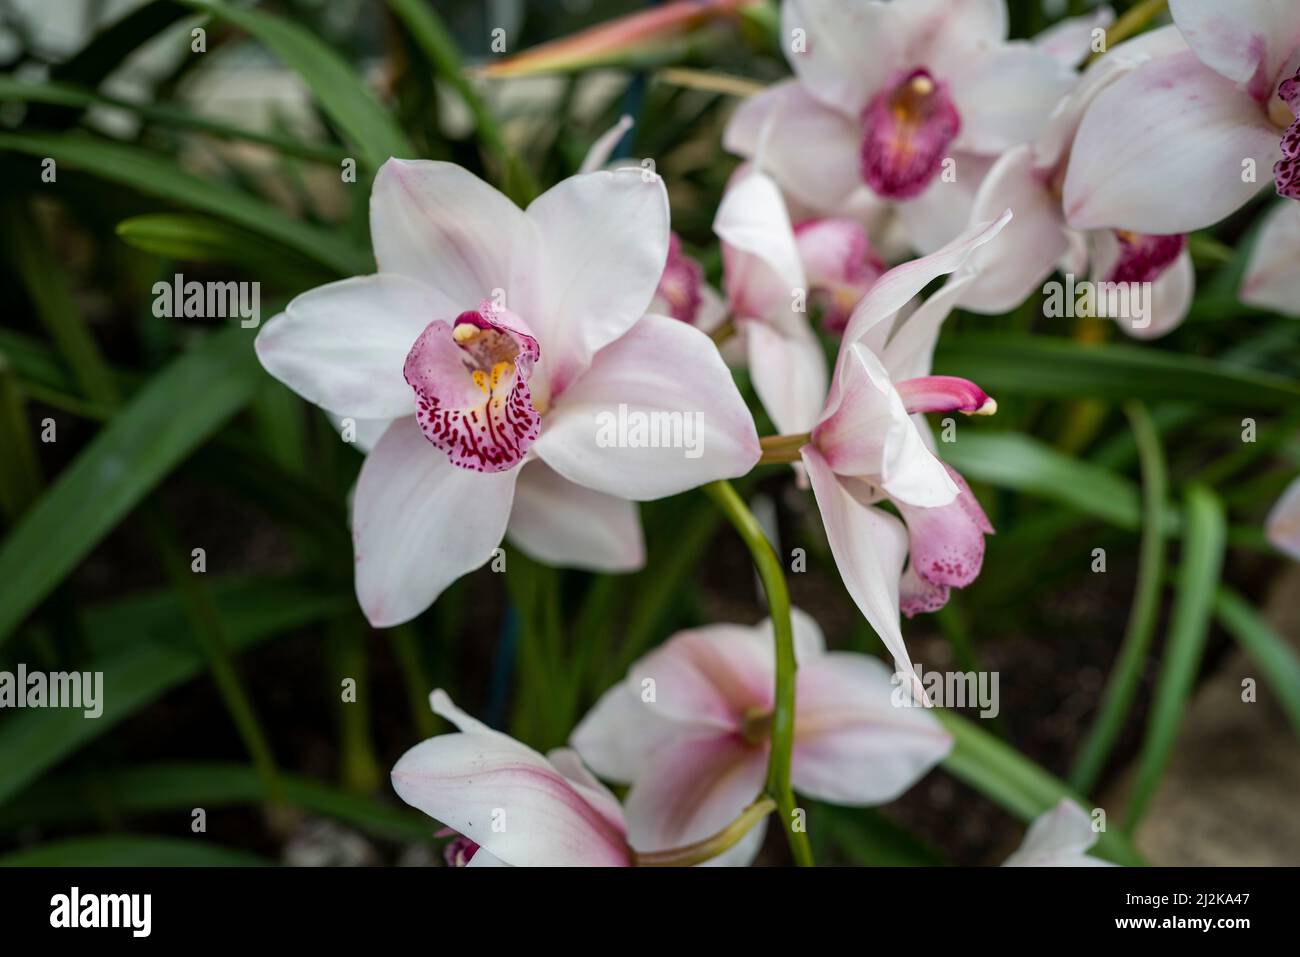 Cymbidium are epiphytic, lithophytic or terrestrial orchids with prominent spherical to ovoid pseudobulbs, long linear leaves and fleshy white roots. Stock Photo